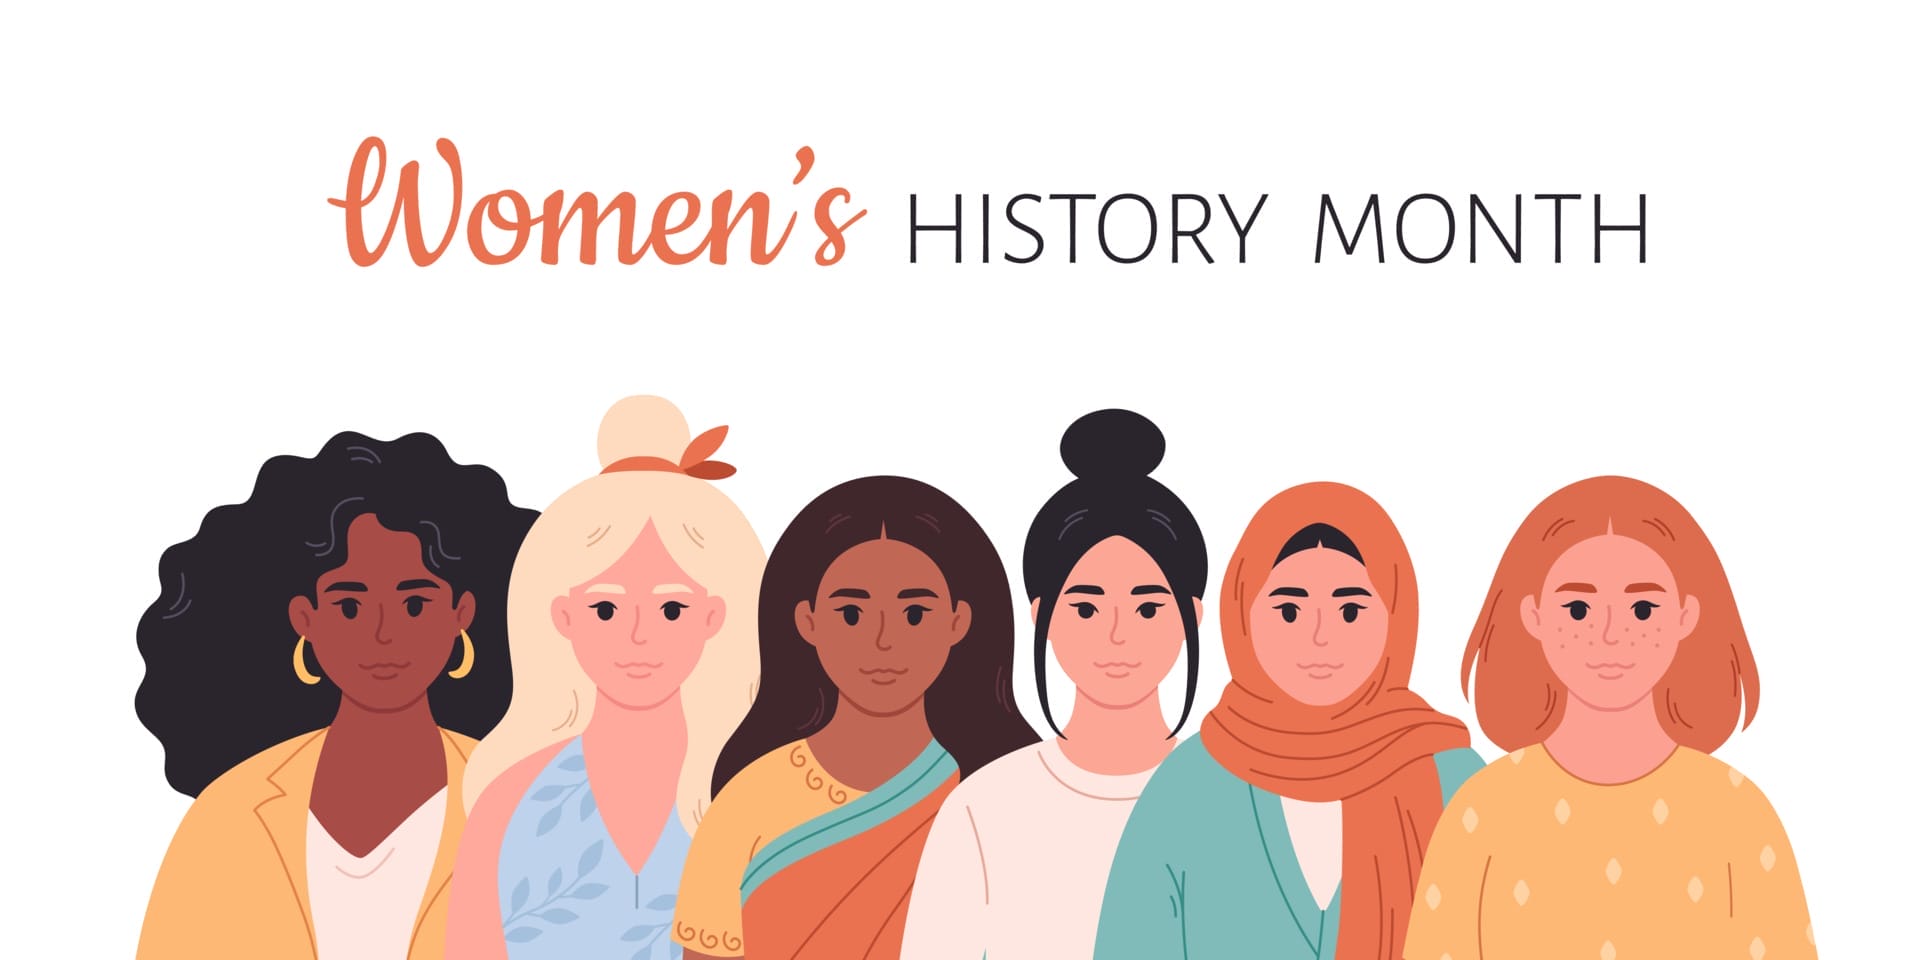 Graphic showing women of various ethnicities and a headline of Women's History Month